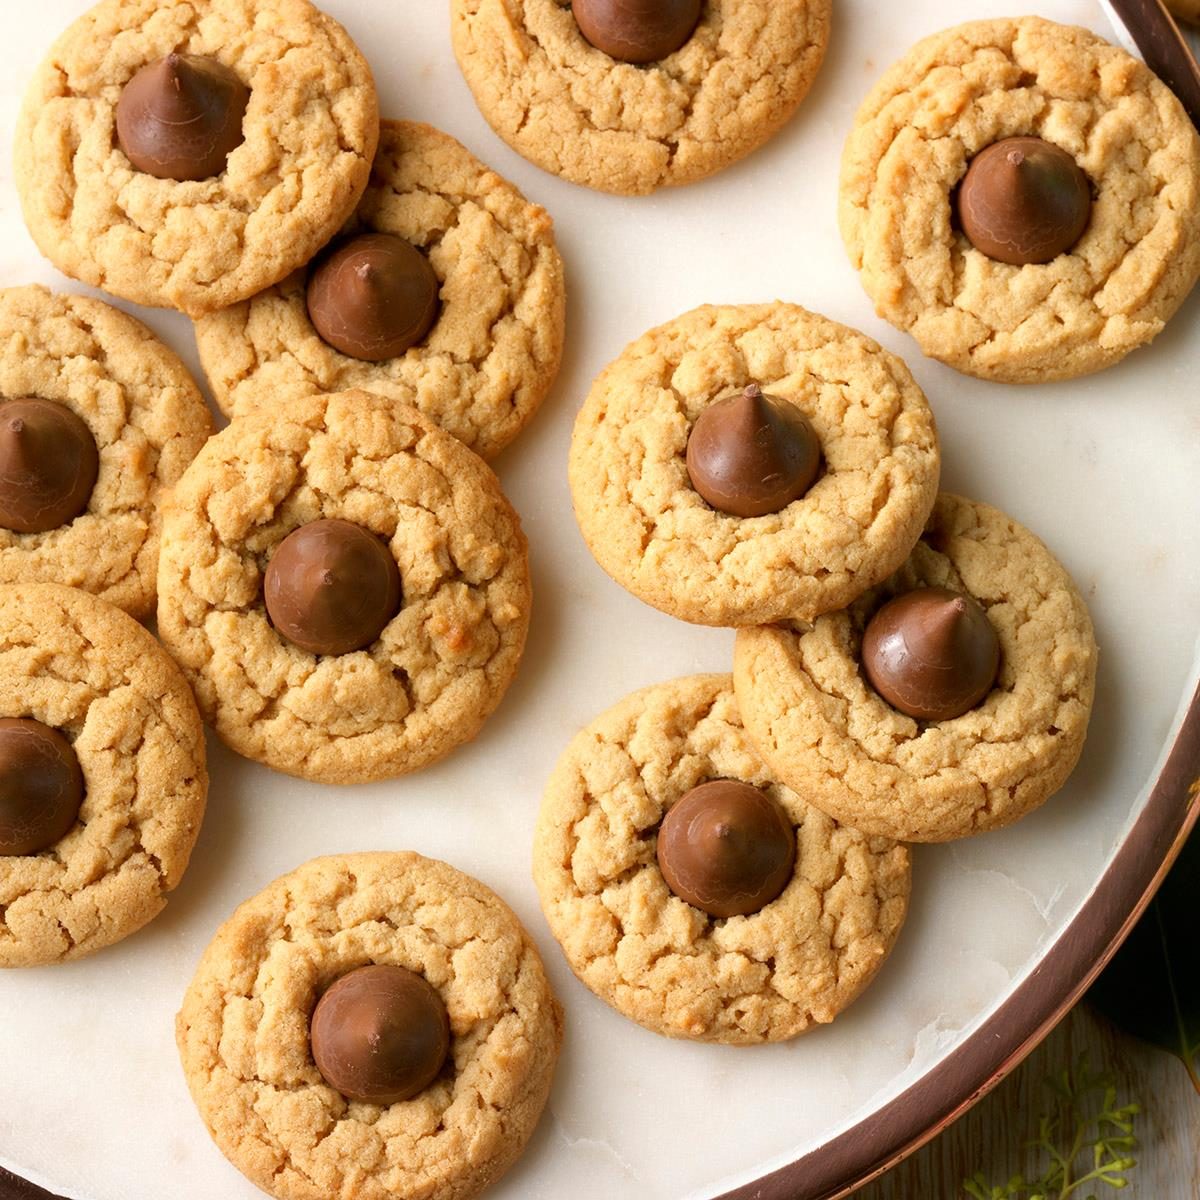 Today's Home Bakers Share Their Secrets to the Best Cookie Platters Ever